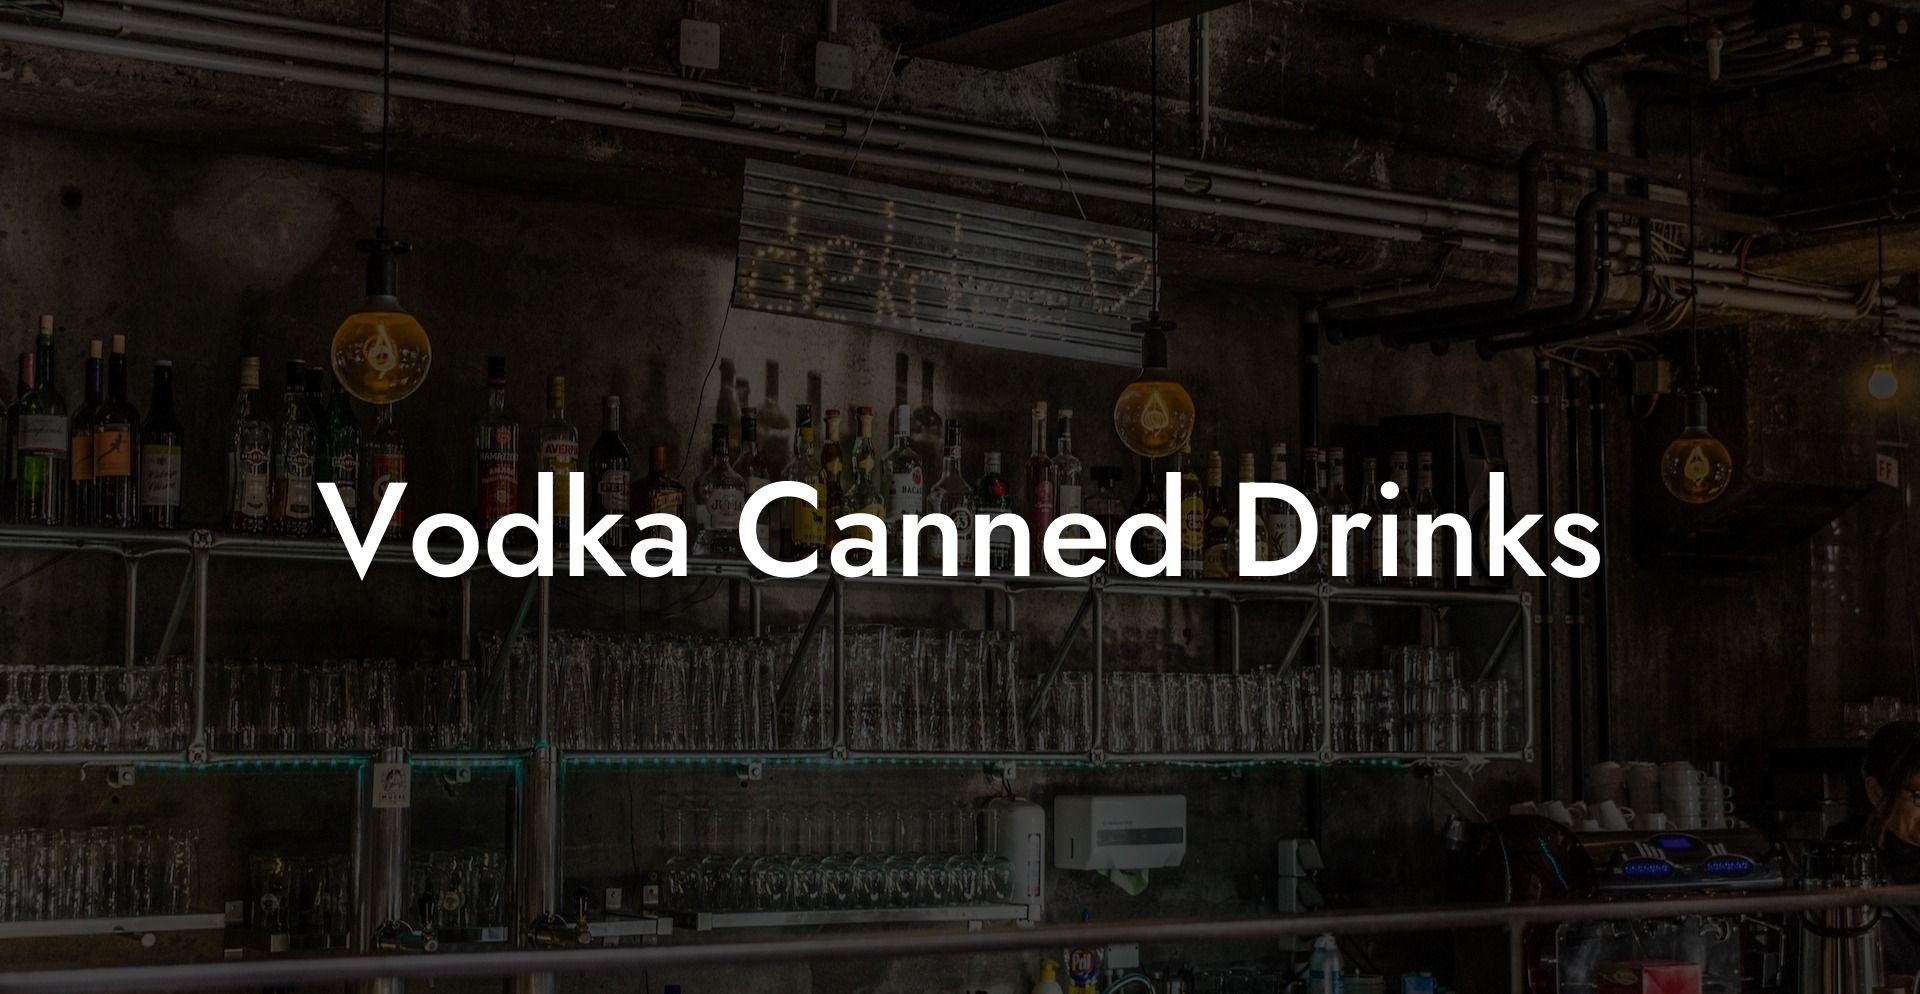 Vodka Canned Drinks